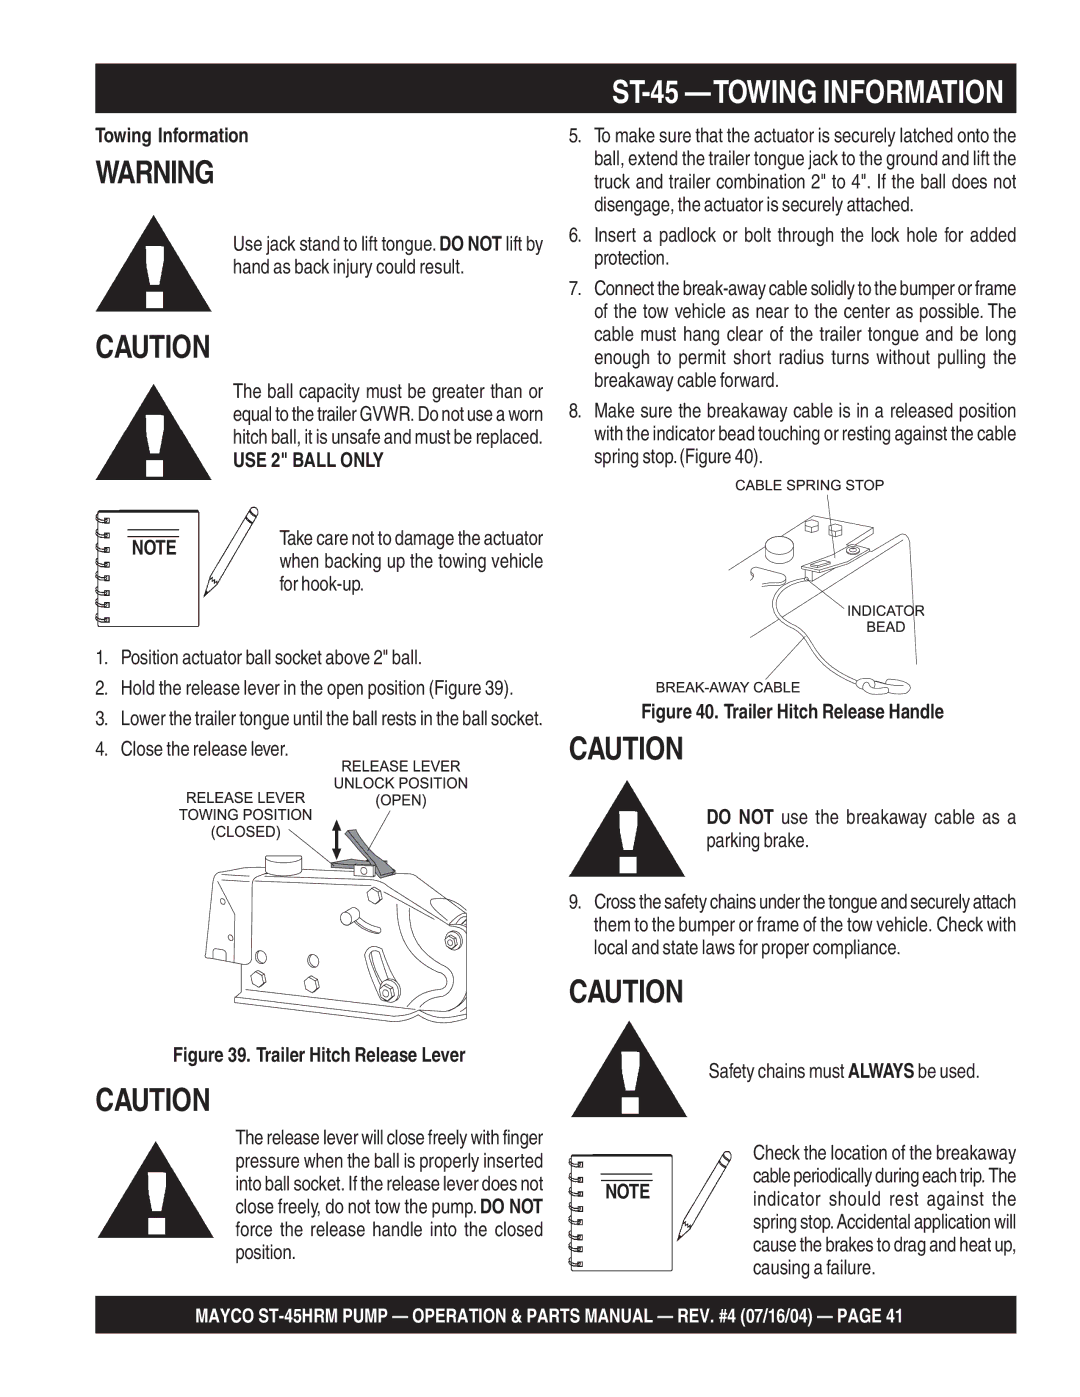 Multiquip ST-45HRM manual ST-45 -TOWING Information, Towing Information, USE 2 Ball only 